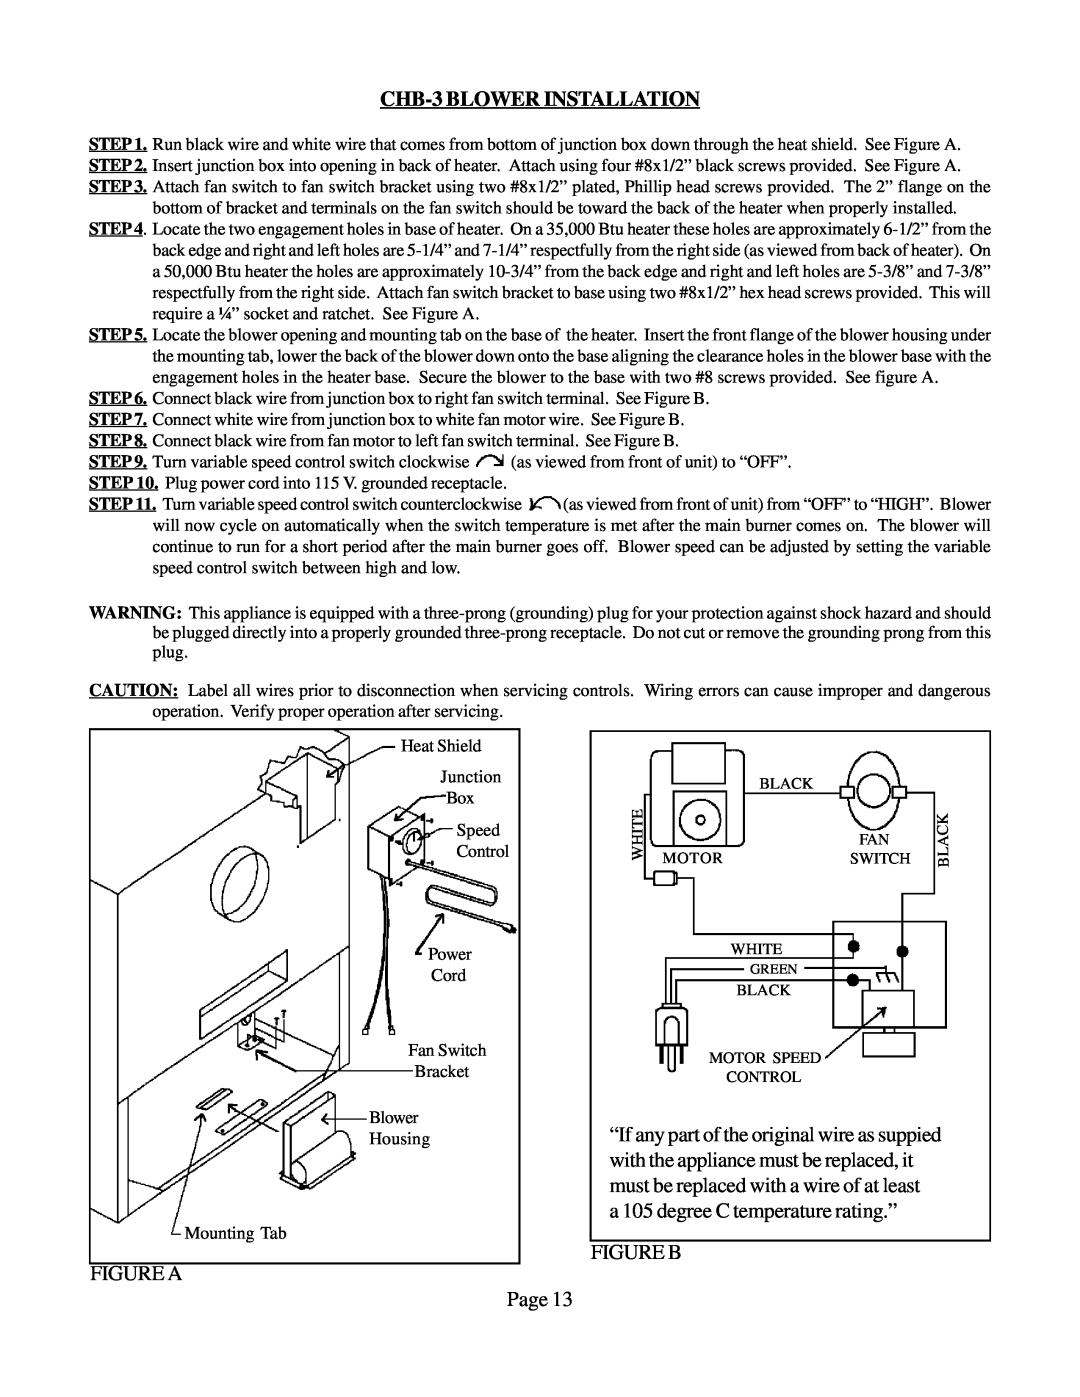 Louisville Tin and Stove VC501A CHB-3BLOWER INSTALLATION, “If any part of the original wire as suppied, Figure B, Figure A 